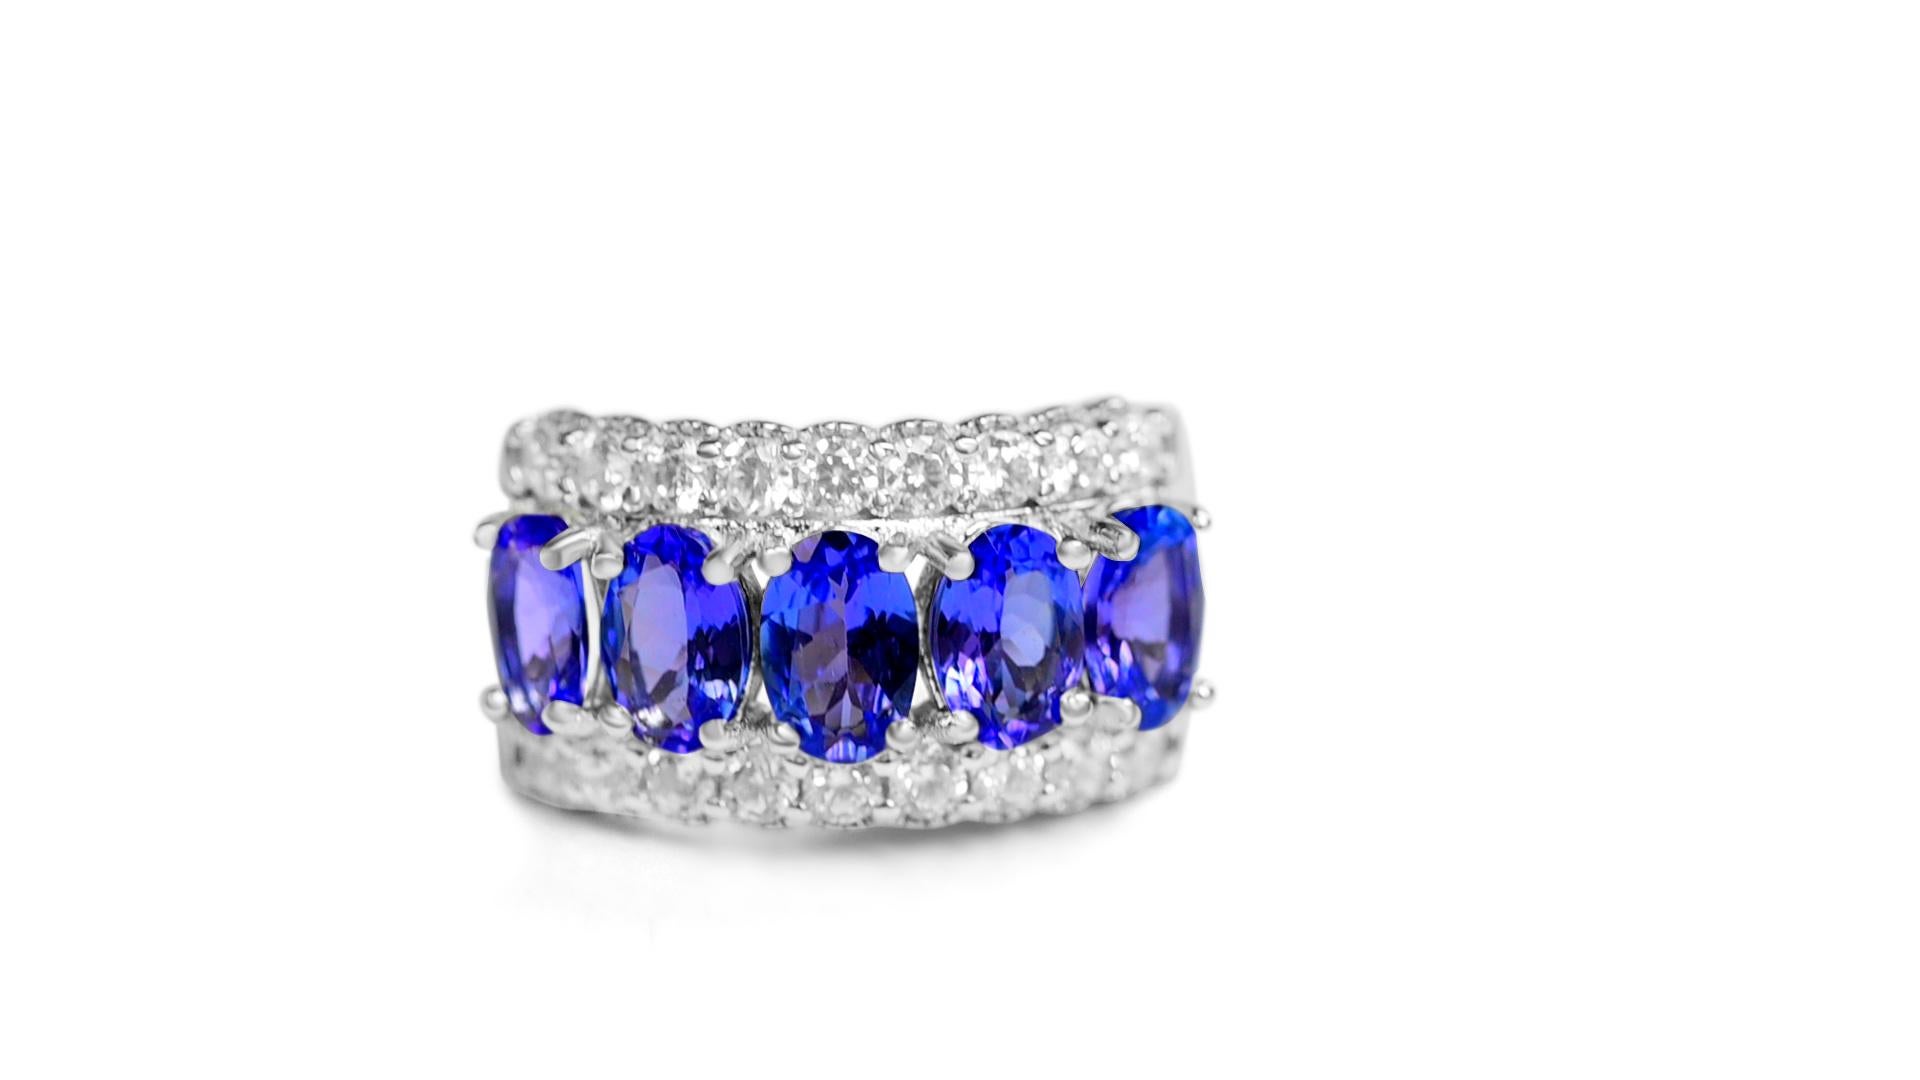 Oval Cut 2.25 Ct Tanzanite & Cubic Zirconia Antique Ring 925 Sterling Silver Bridal Ring 